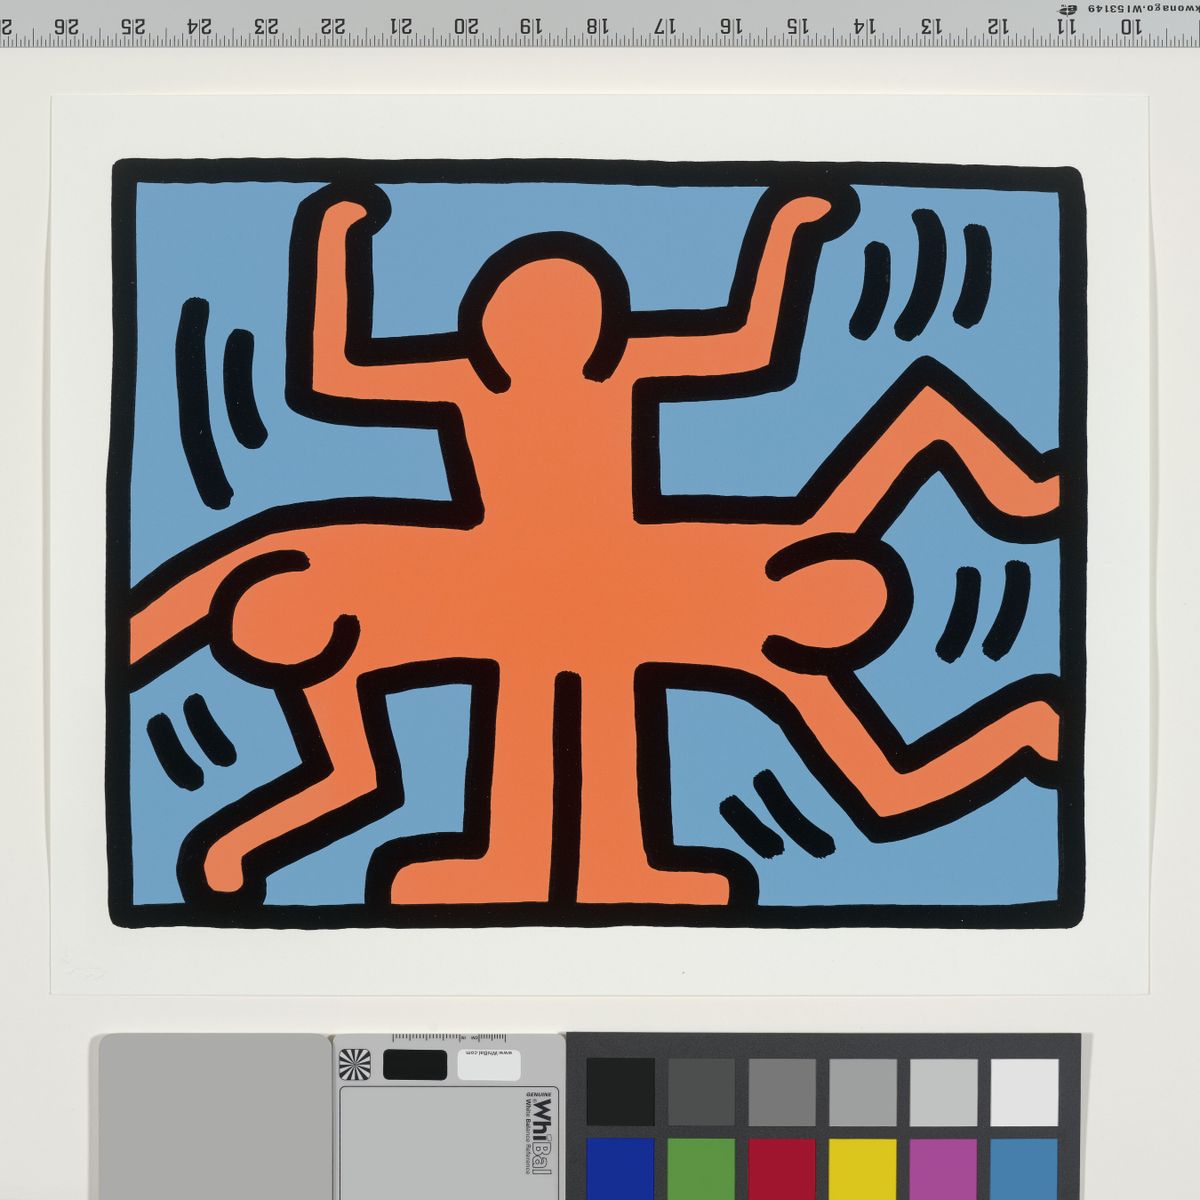 Keith Haring’s “Pop Shop VI,” from the collection of the Jordan Schnitzer Family Foundation, is part of the MAC’s “Pop Power From Warhol to Koons” exhibit.  (Keith Haring Foundation)